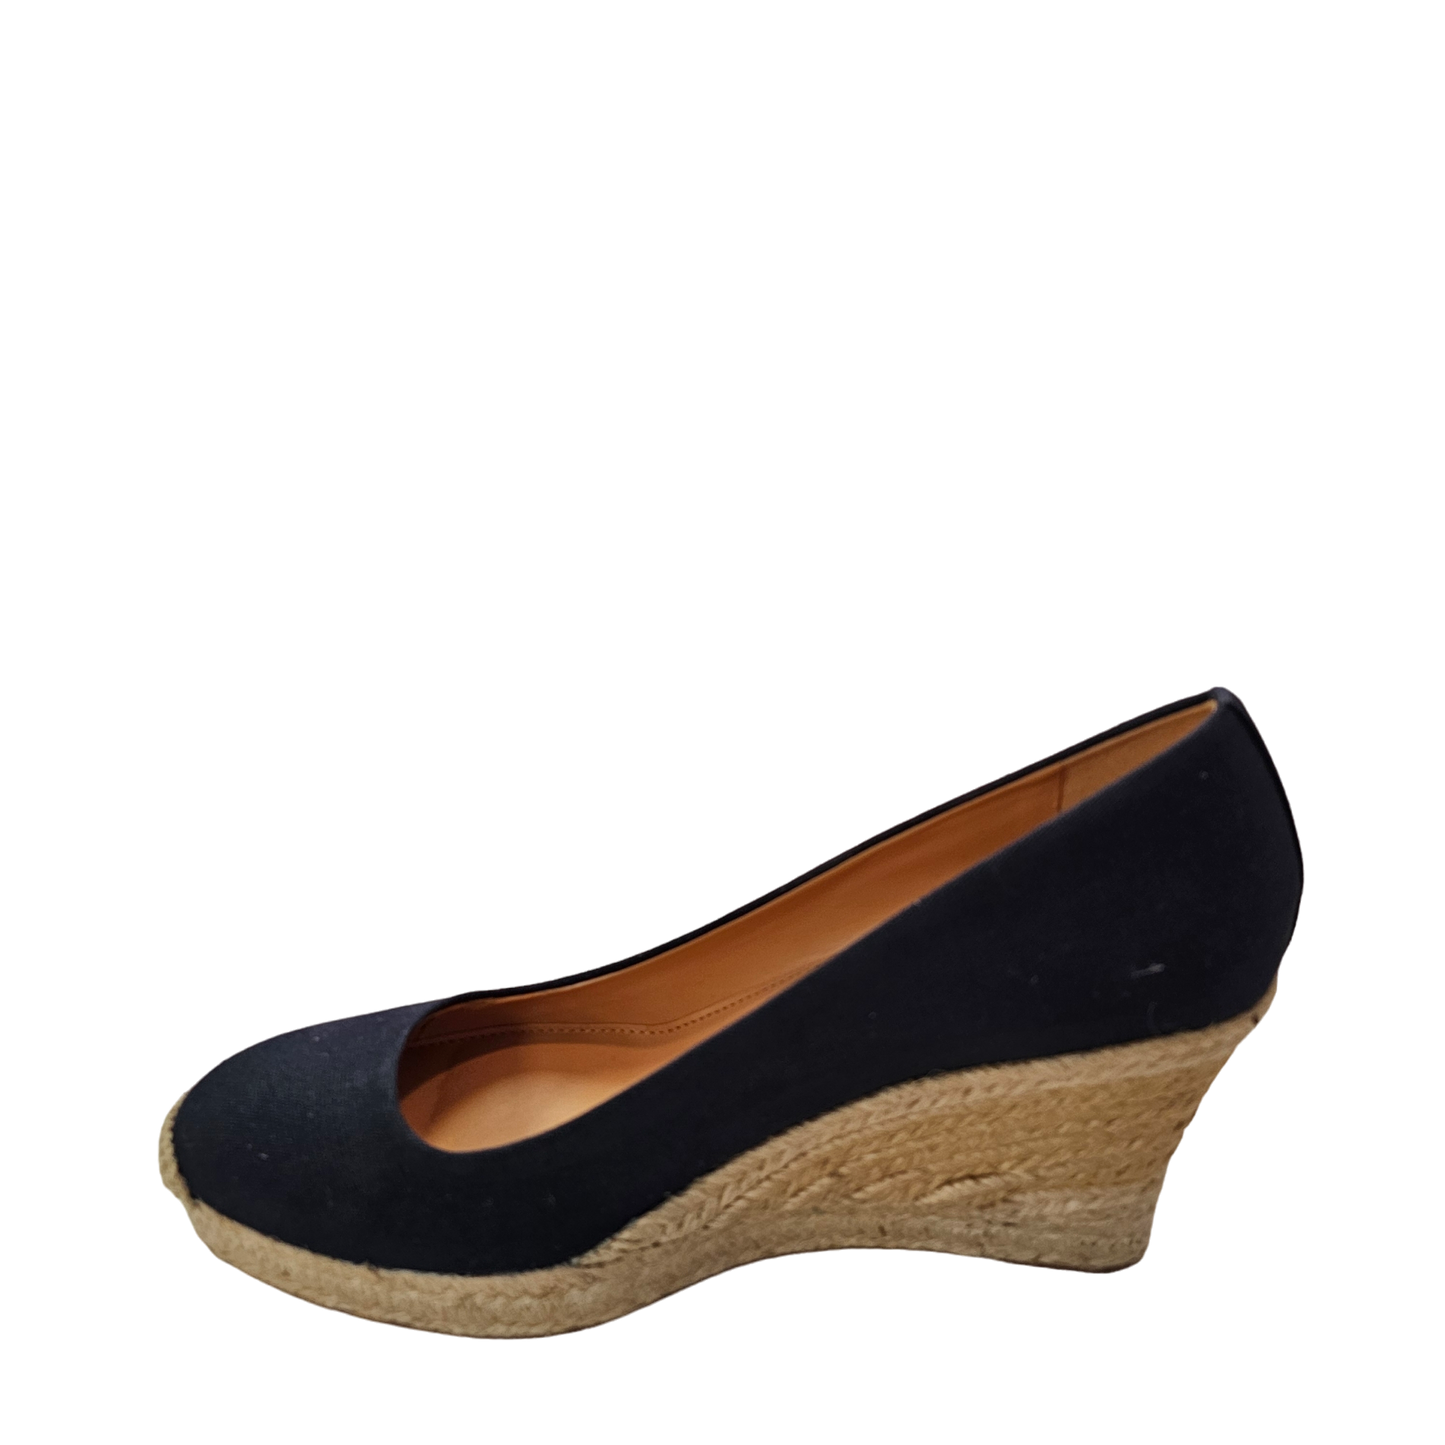 Shoes Heels Espadrille Wedge By J Crew  Size: 9.5